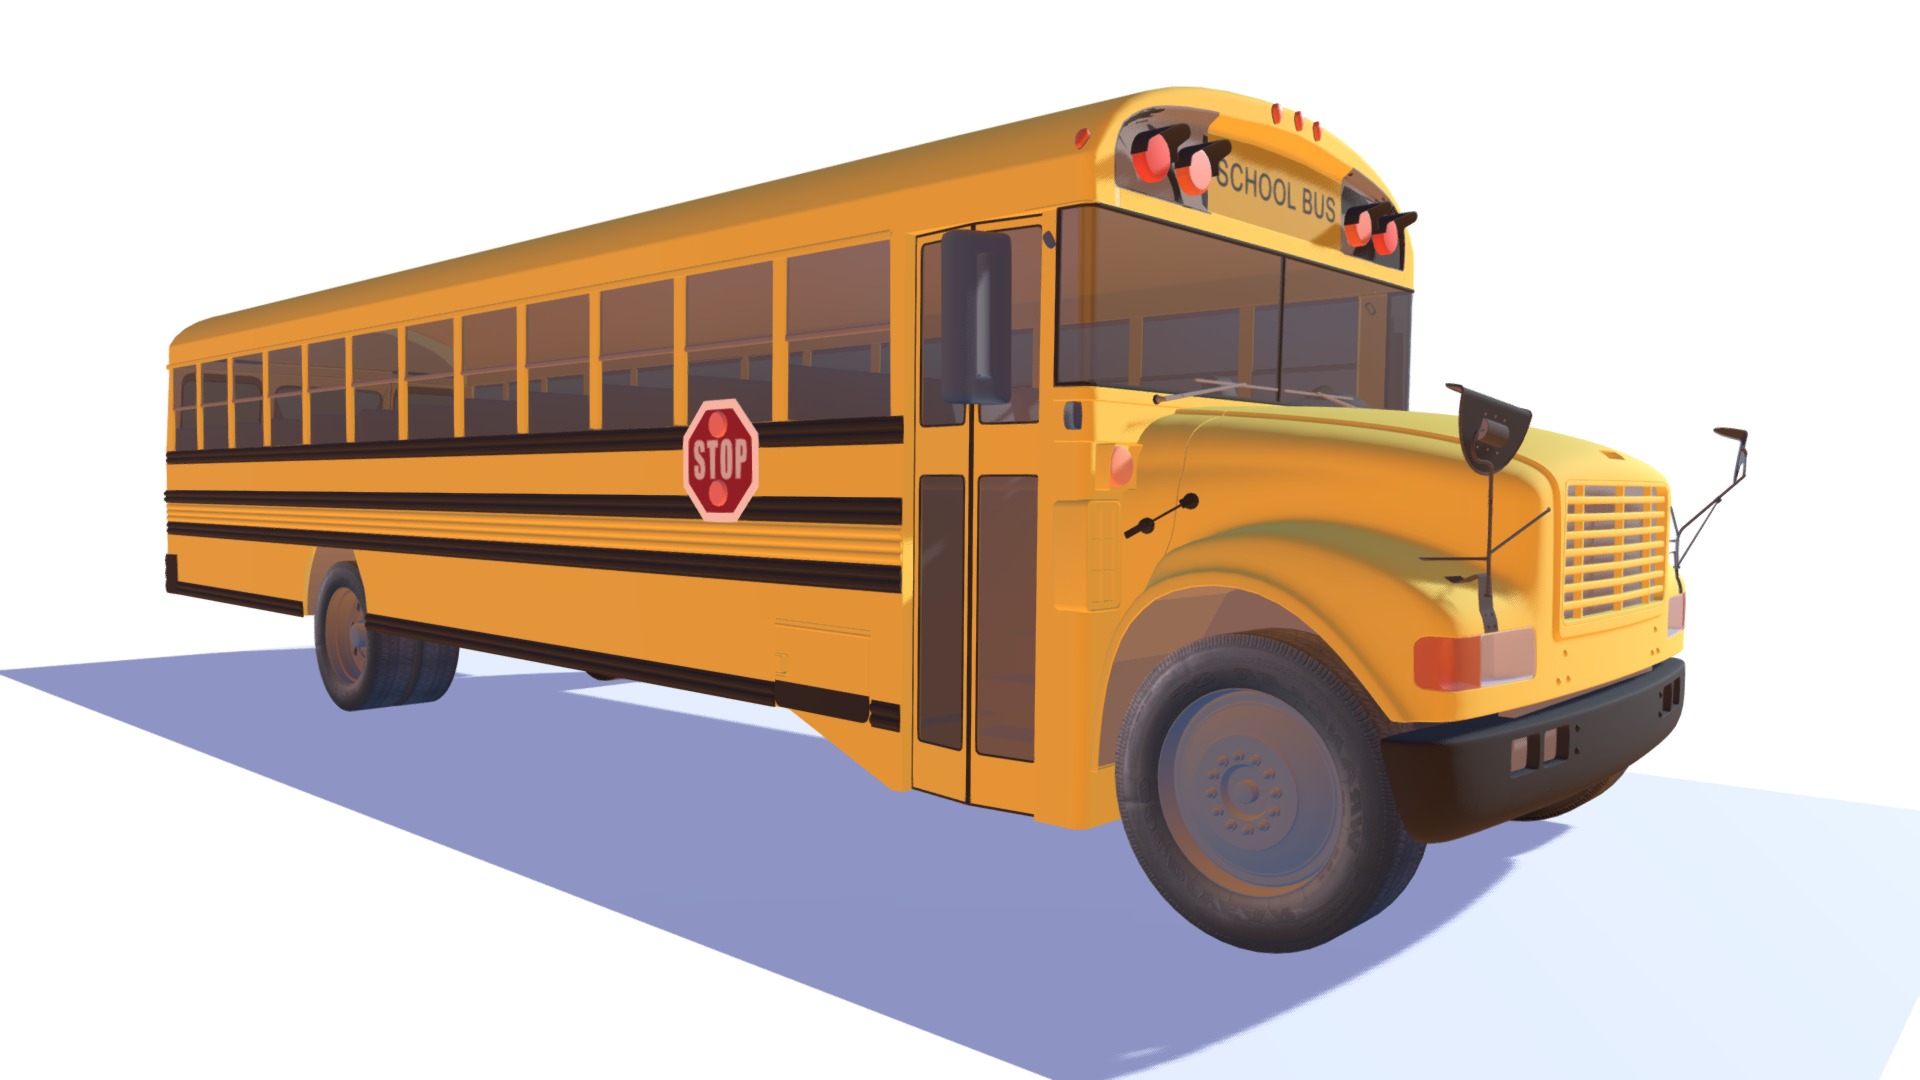 3D model School Bus - This is a 3D model of the School Bus. The 3D model is about a yellow school bus.